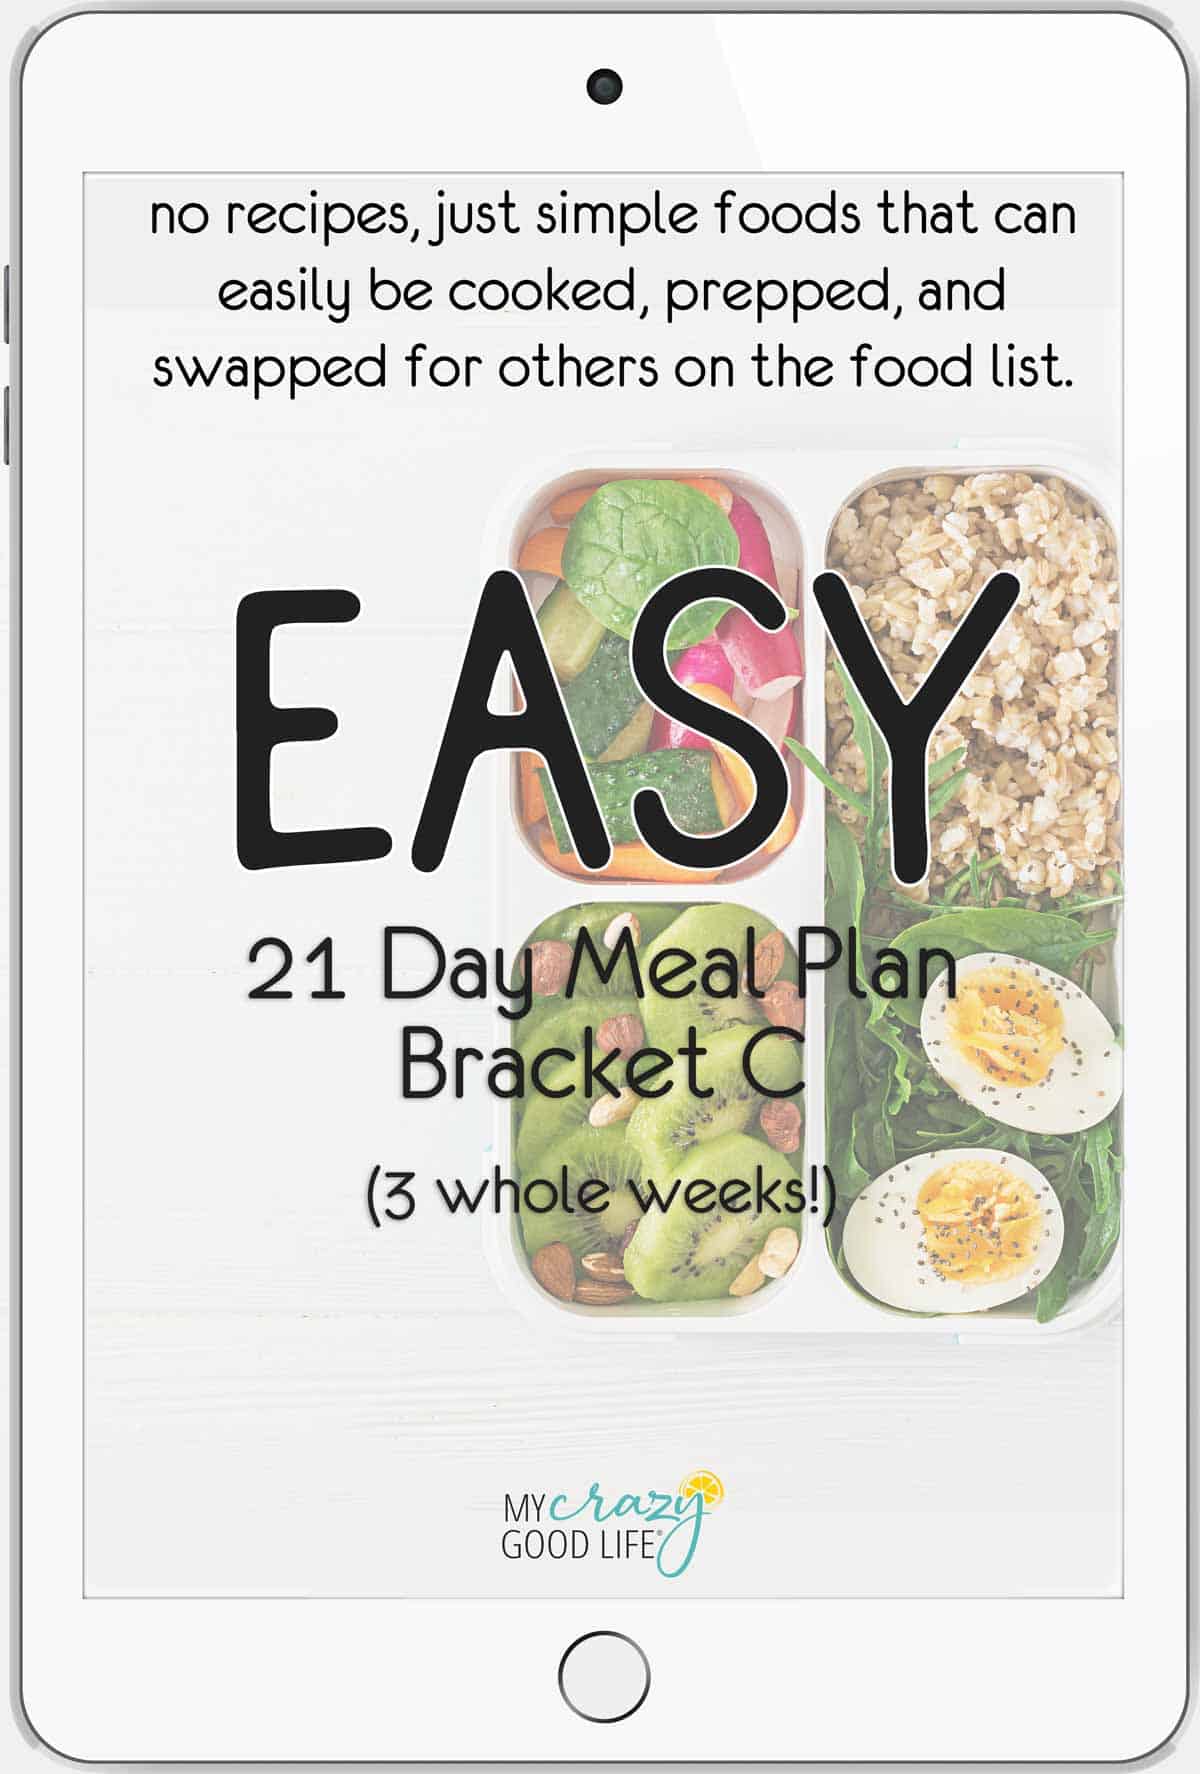 My Meal Plan My Way by Walmart